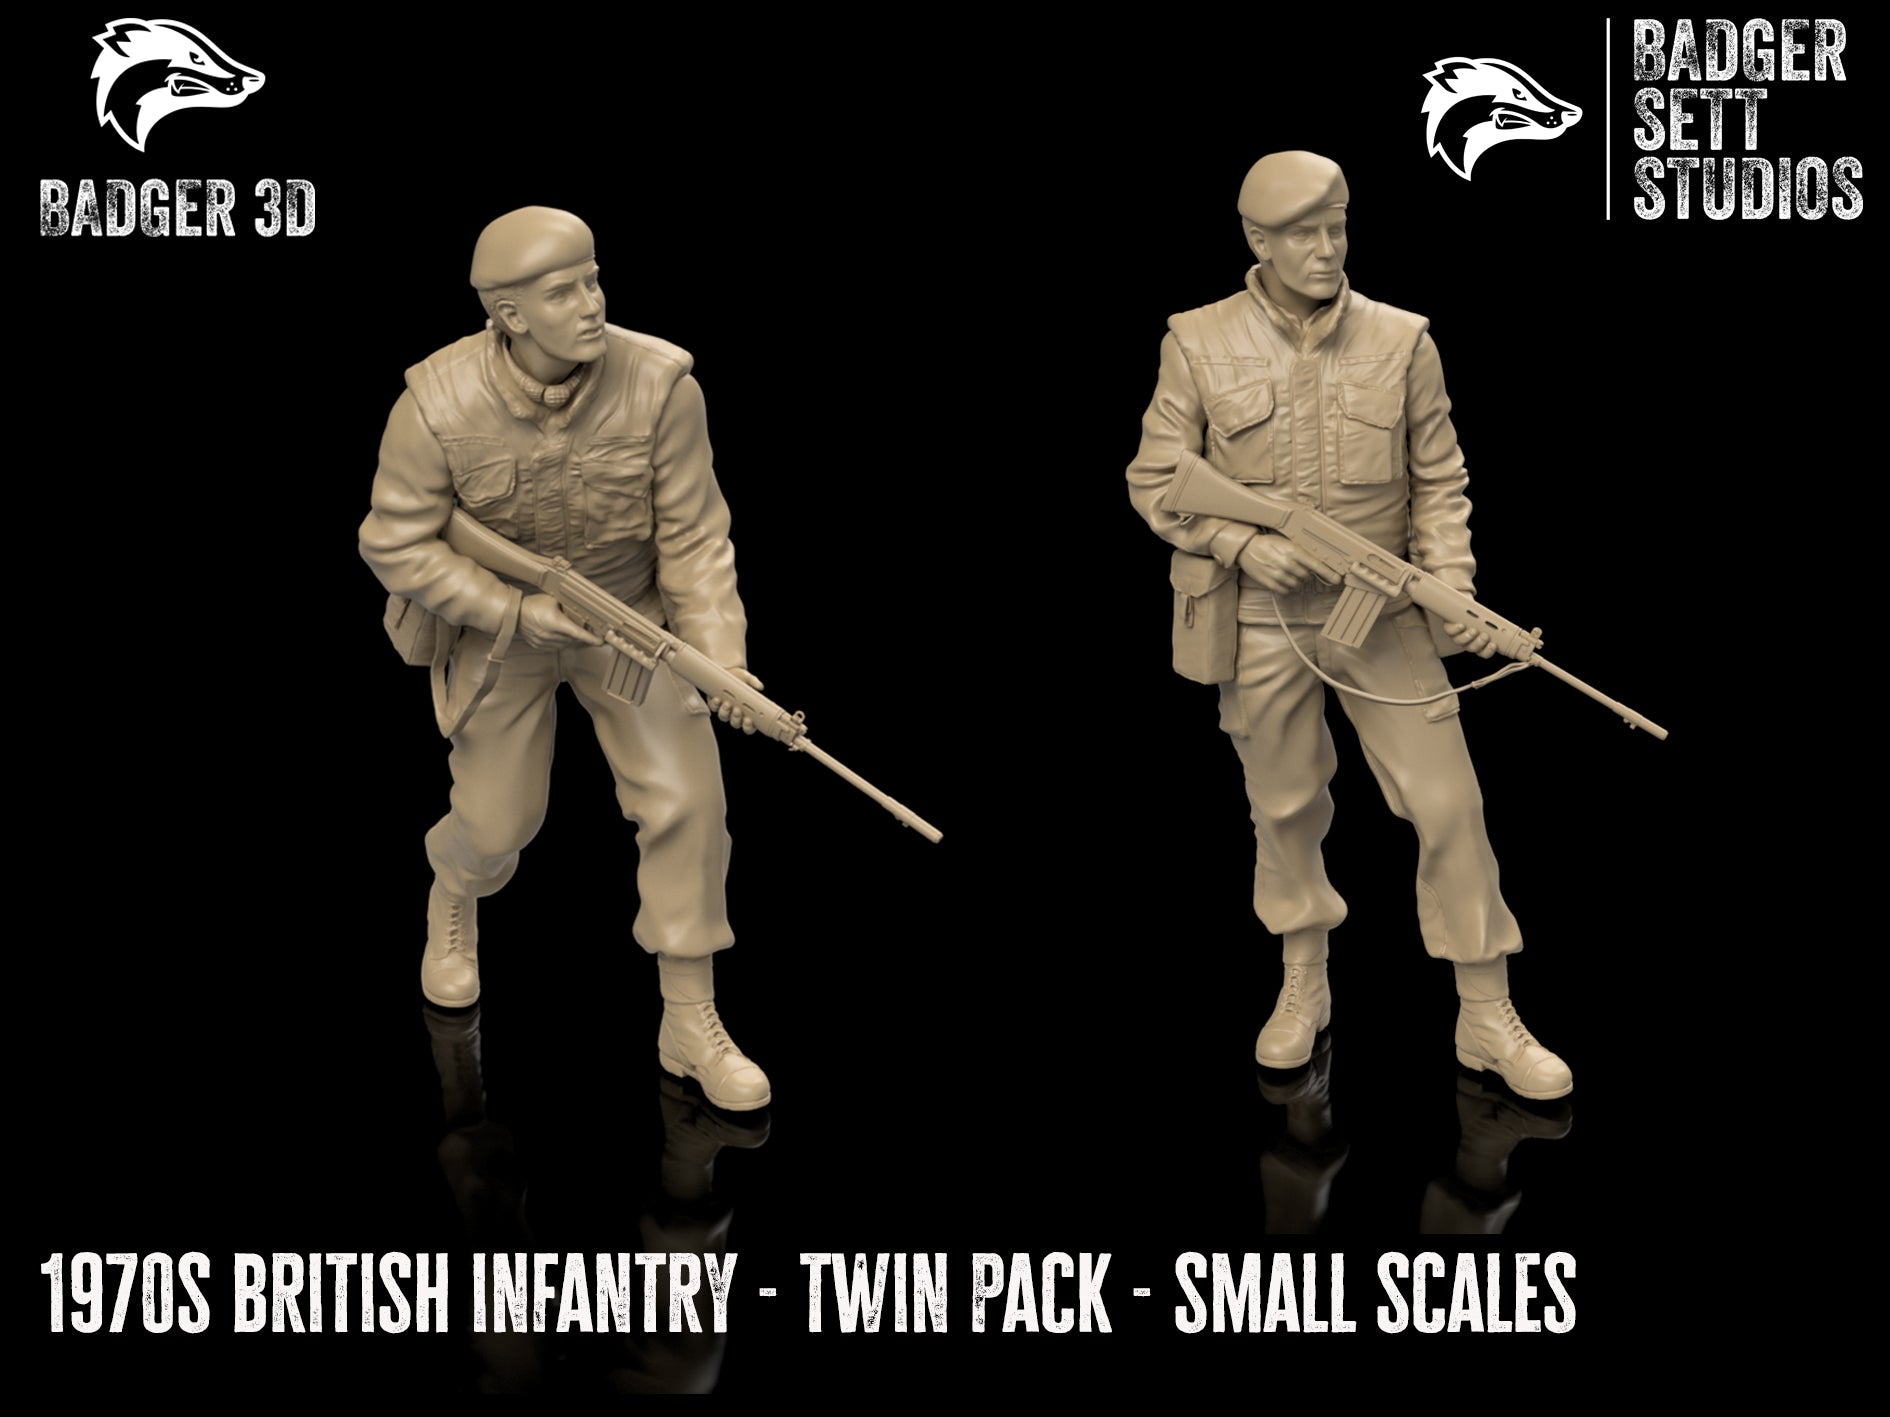 1970s British Infantry Figures x 2 - Small Scales (No1 & No2)